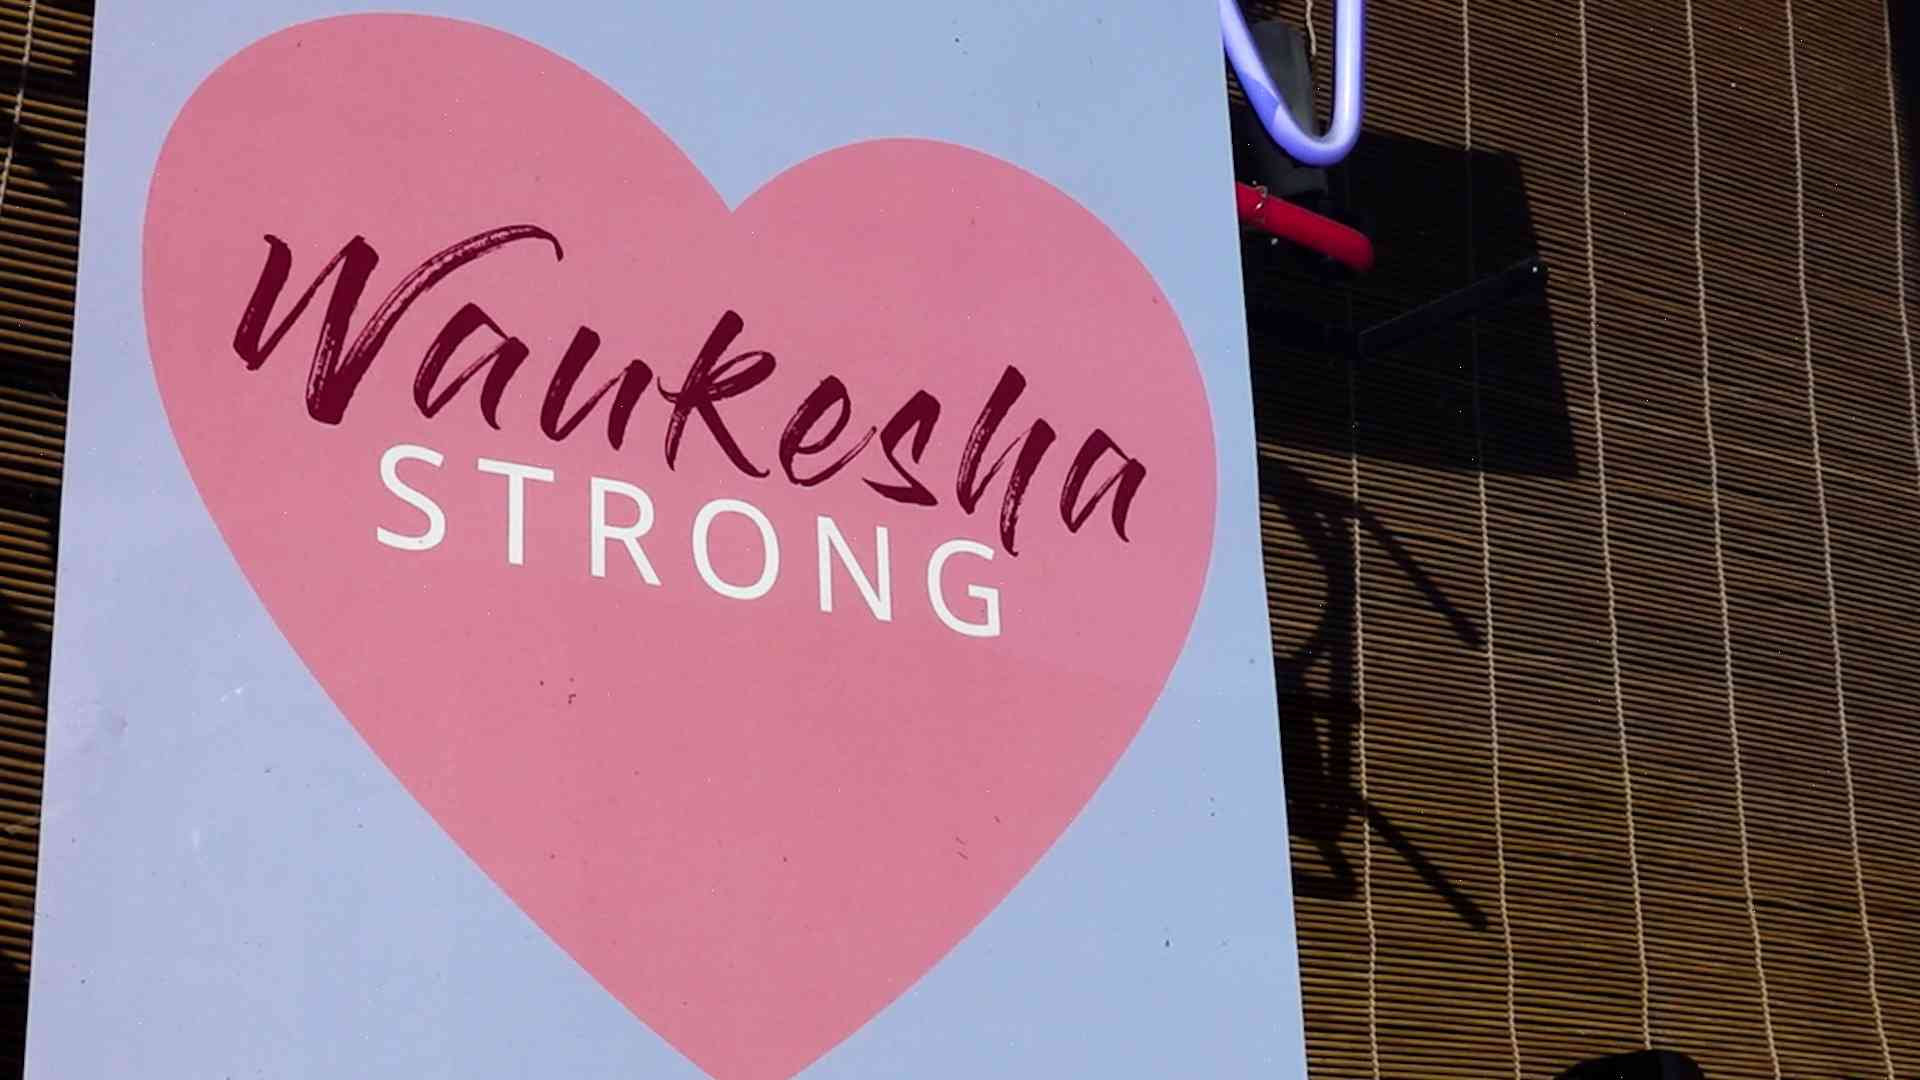 A tour of communities that came together in the wake of the Waukesha shootings